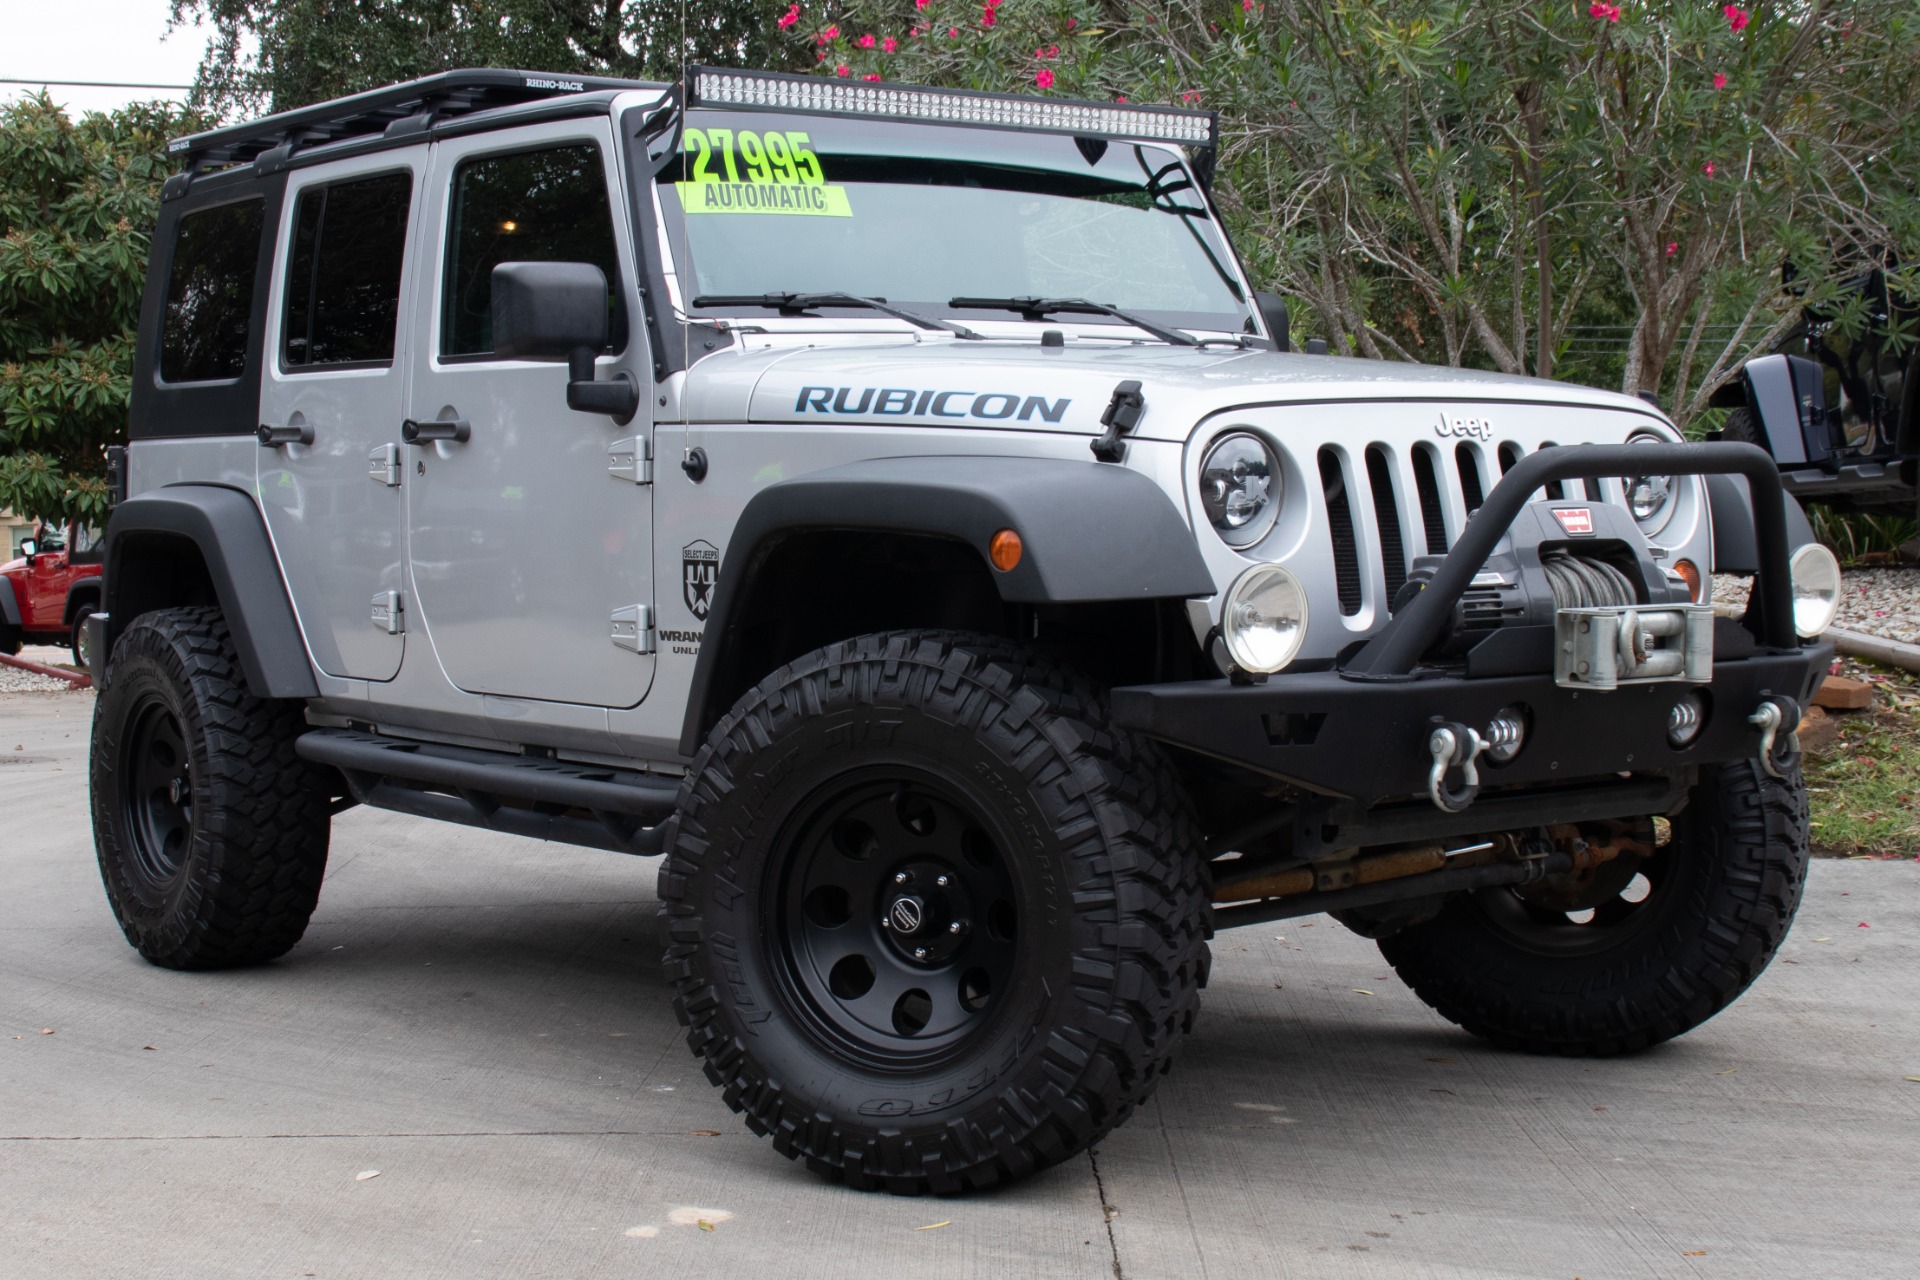 Used 2010 Jeep Wrangler Unlimited Rubicon For Sale ($27,995) | Select Jeeps  Inc. Stock #178395